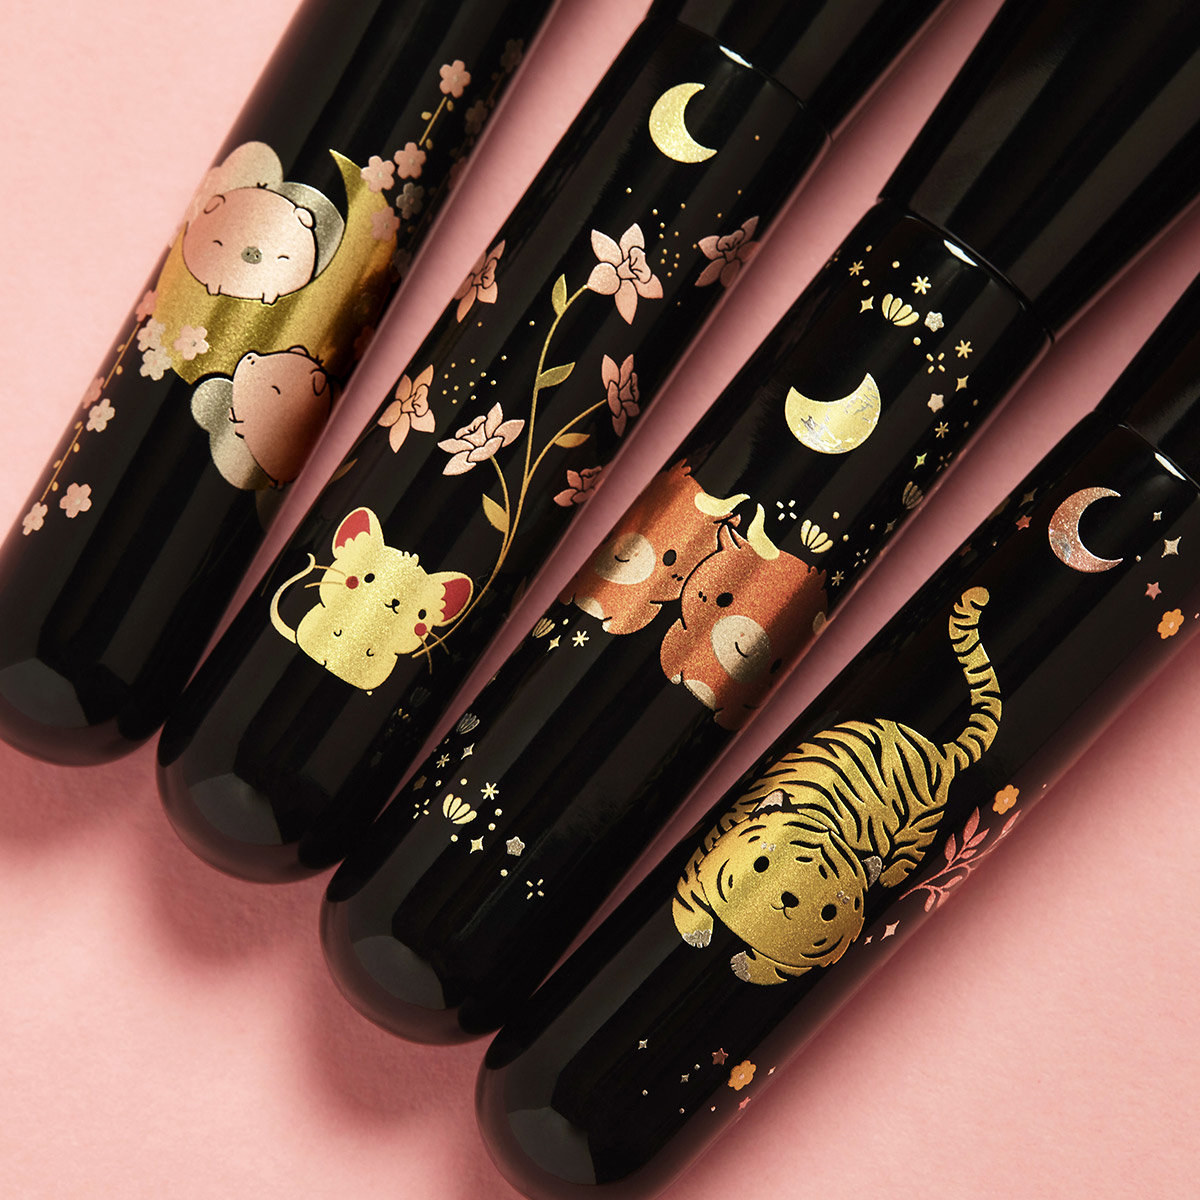 Alternate product image for The Lunar New Year Brush shown with the description.